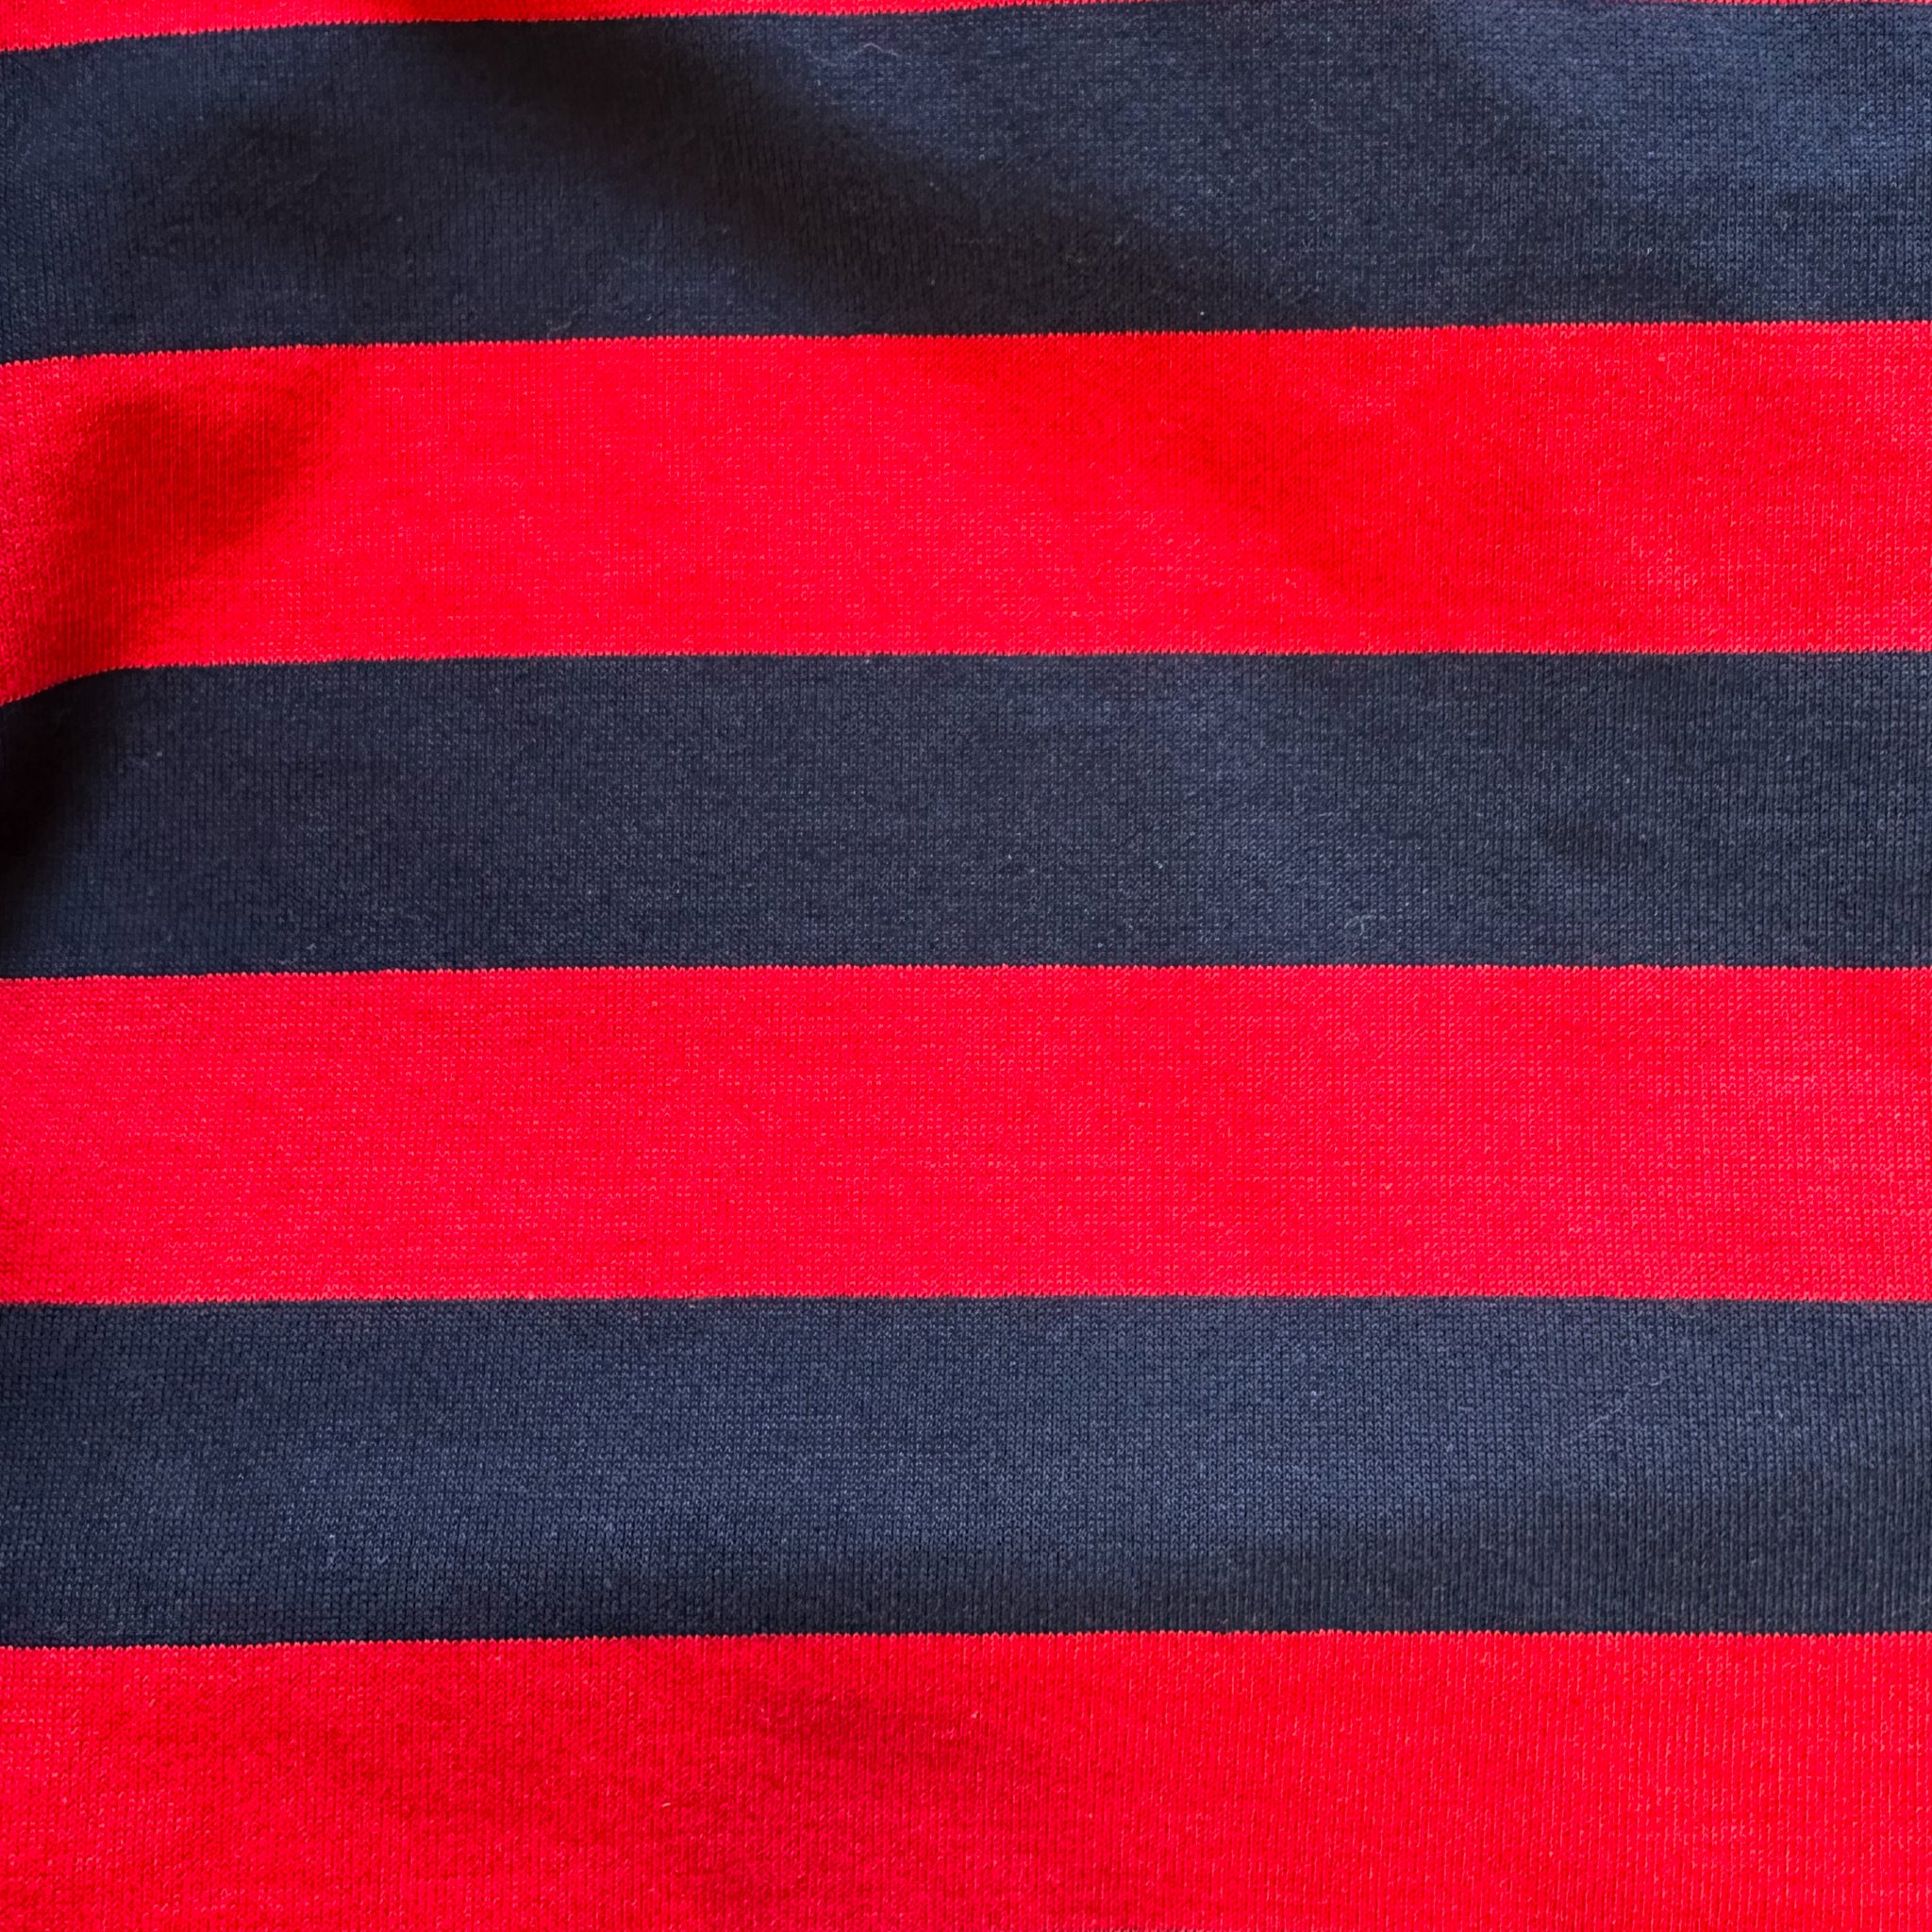 IVY RUGBY JERSEY / AIR SPINNING COTTON JERSEY STRIPE - C10